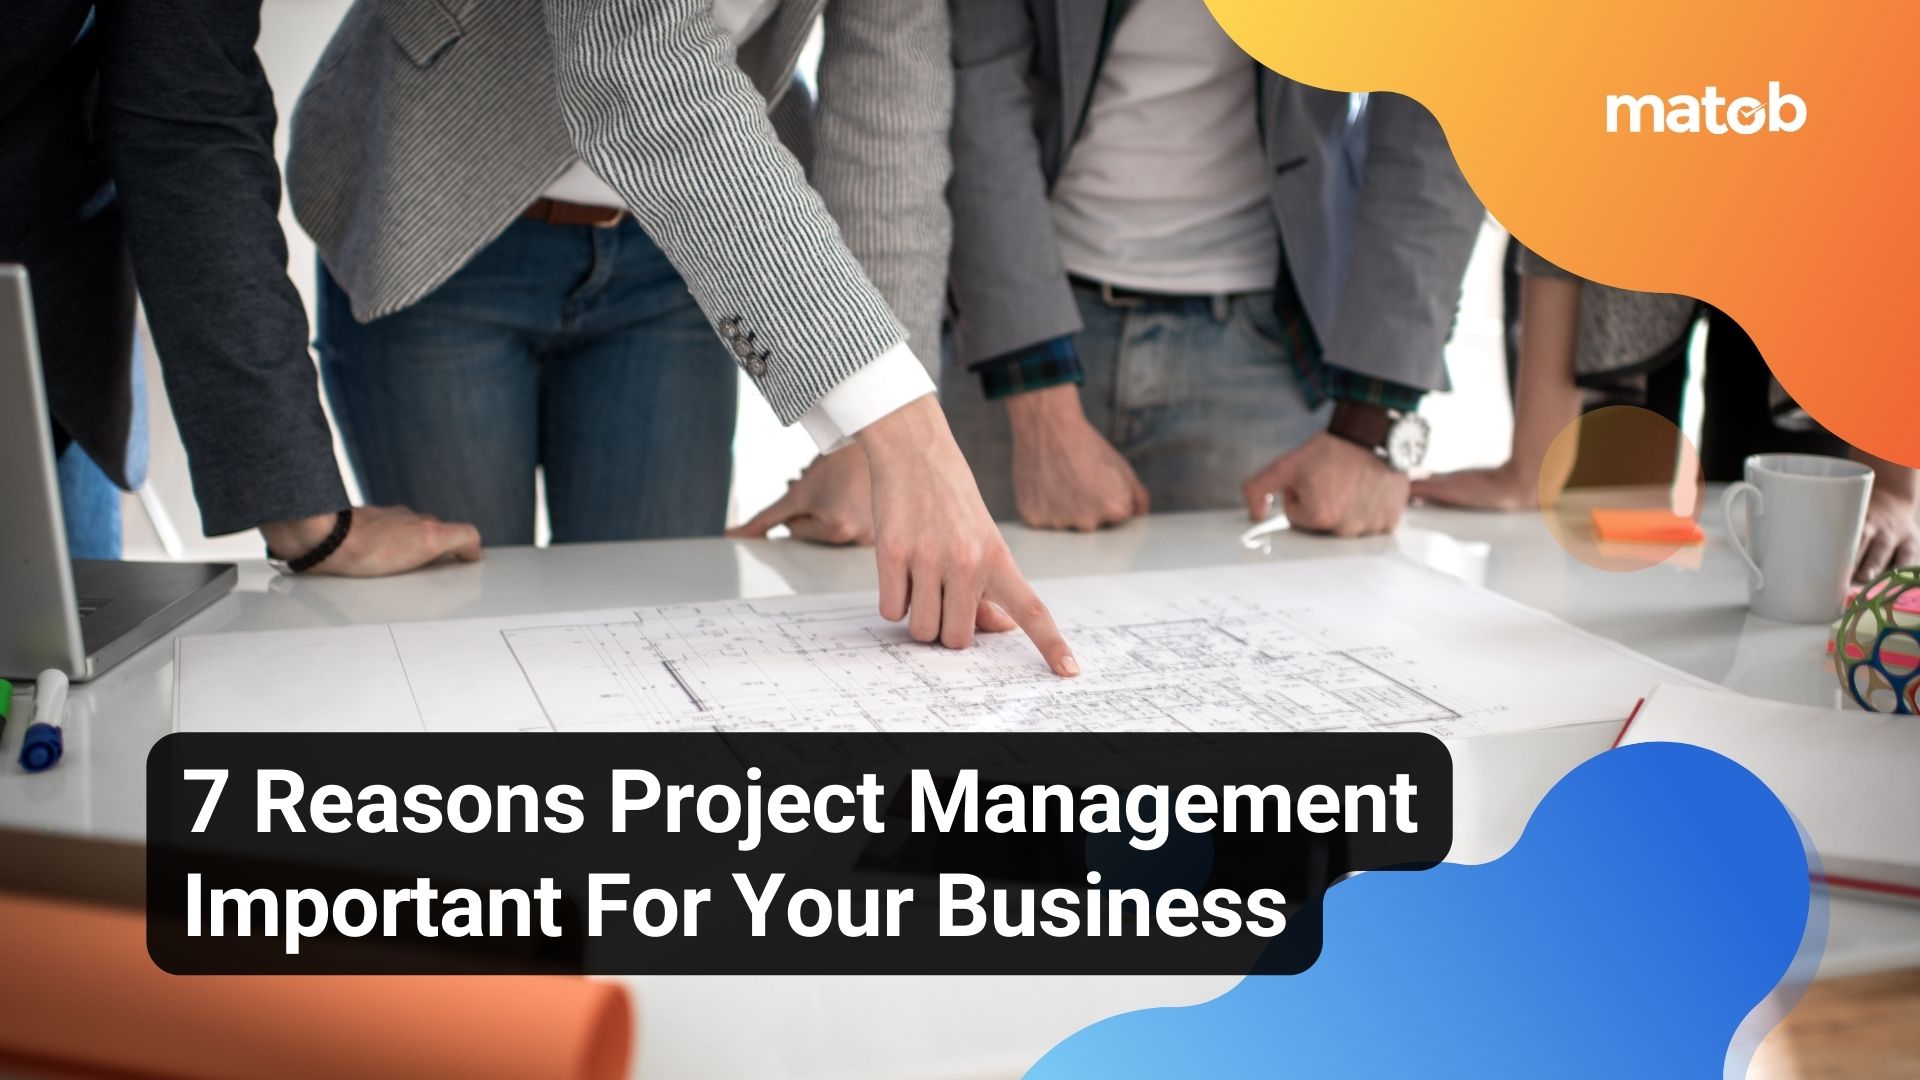 7 Reasons Project Management Important For Your Business